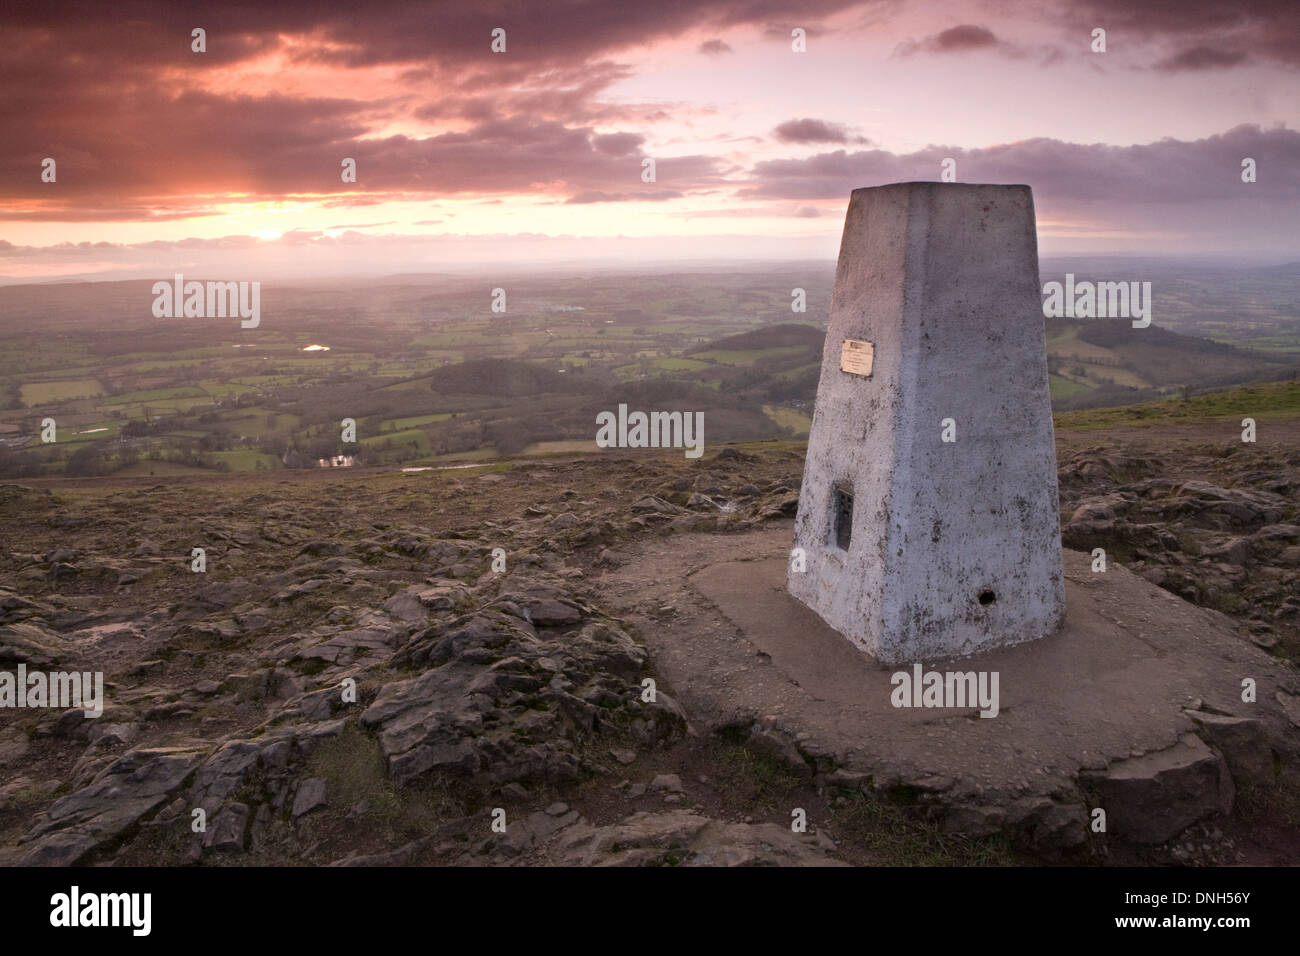 The OS Trig point stands tall on the Worcestershire Beacon on the Malvern Hills at sunset. Stock Photo